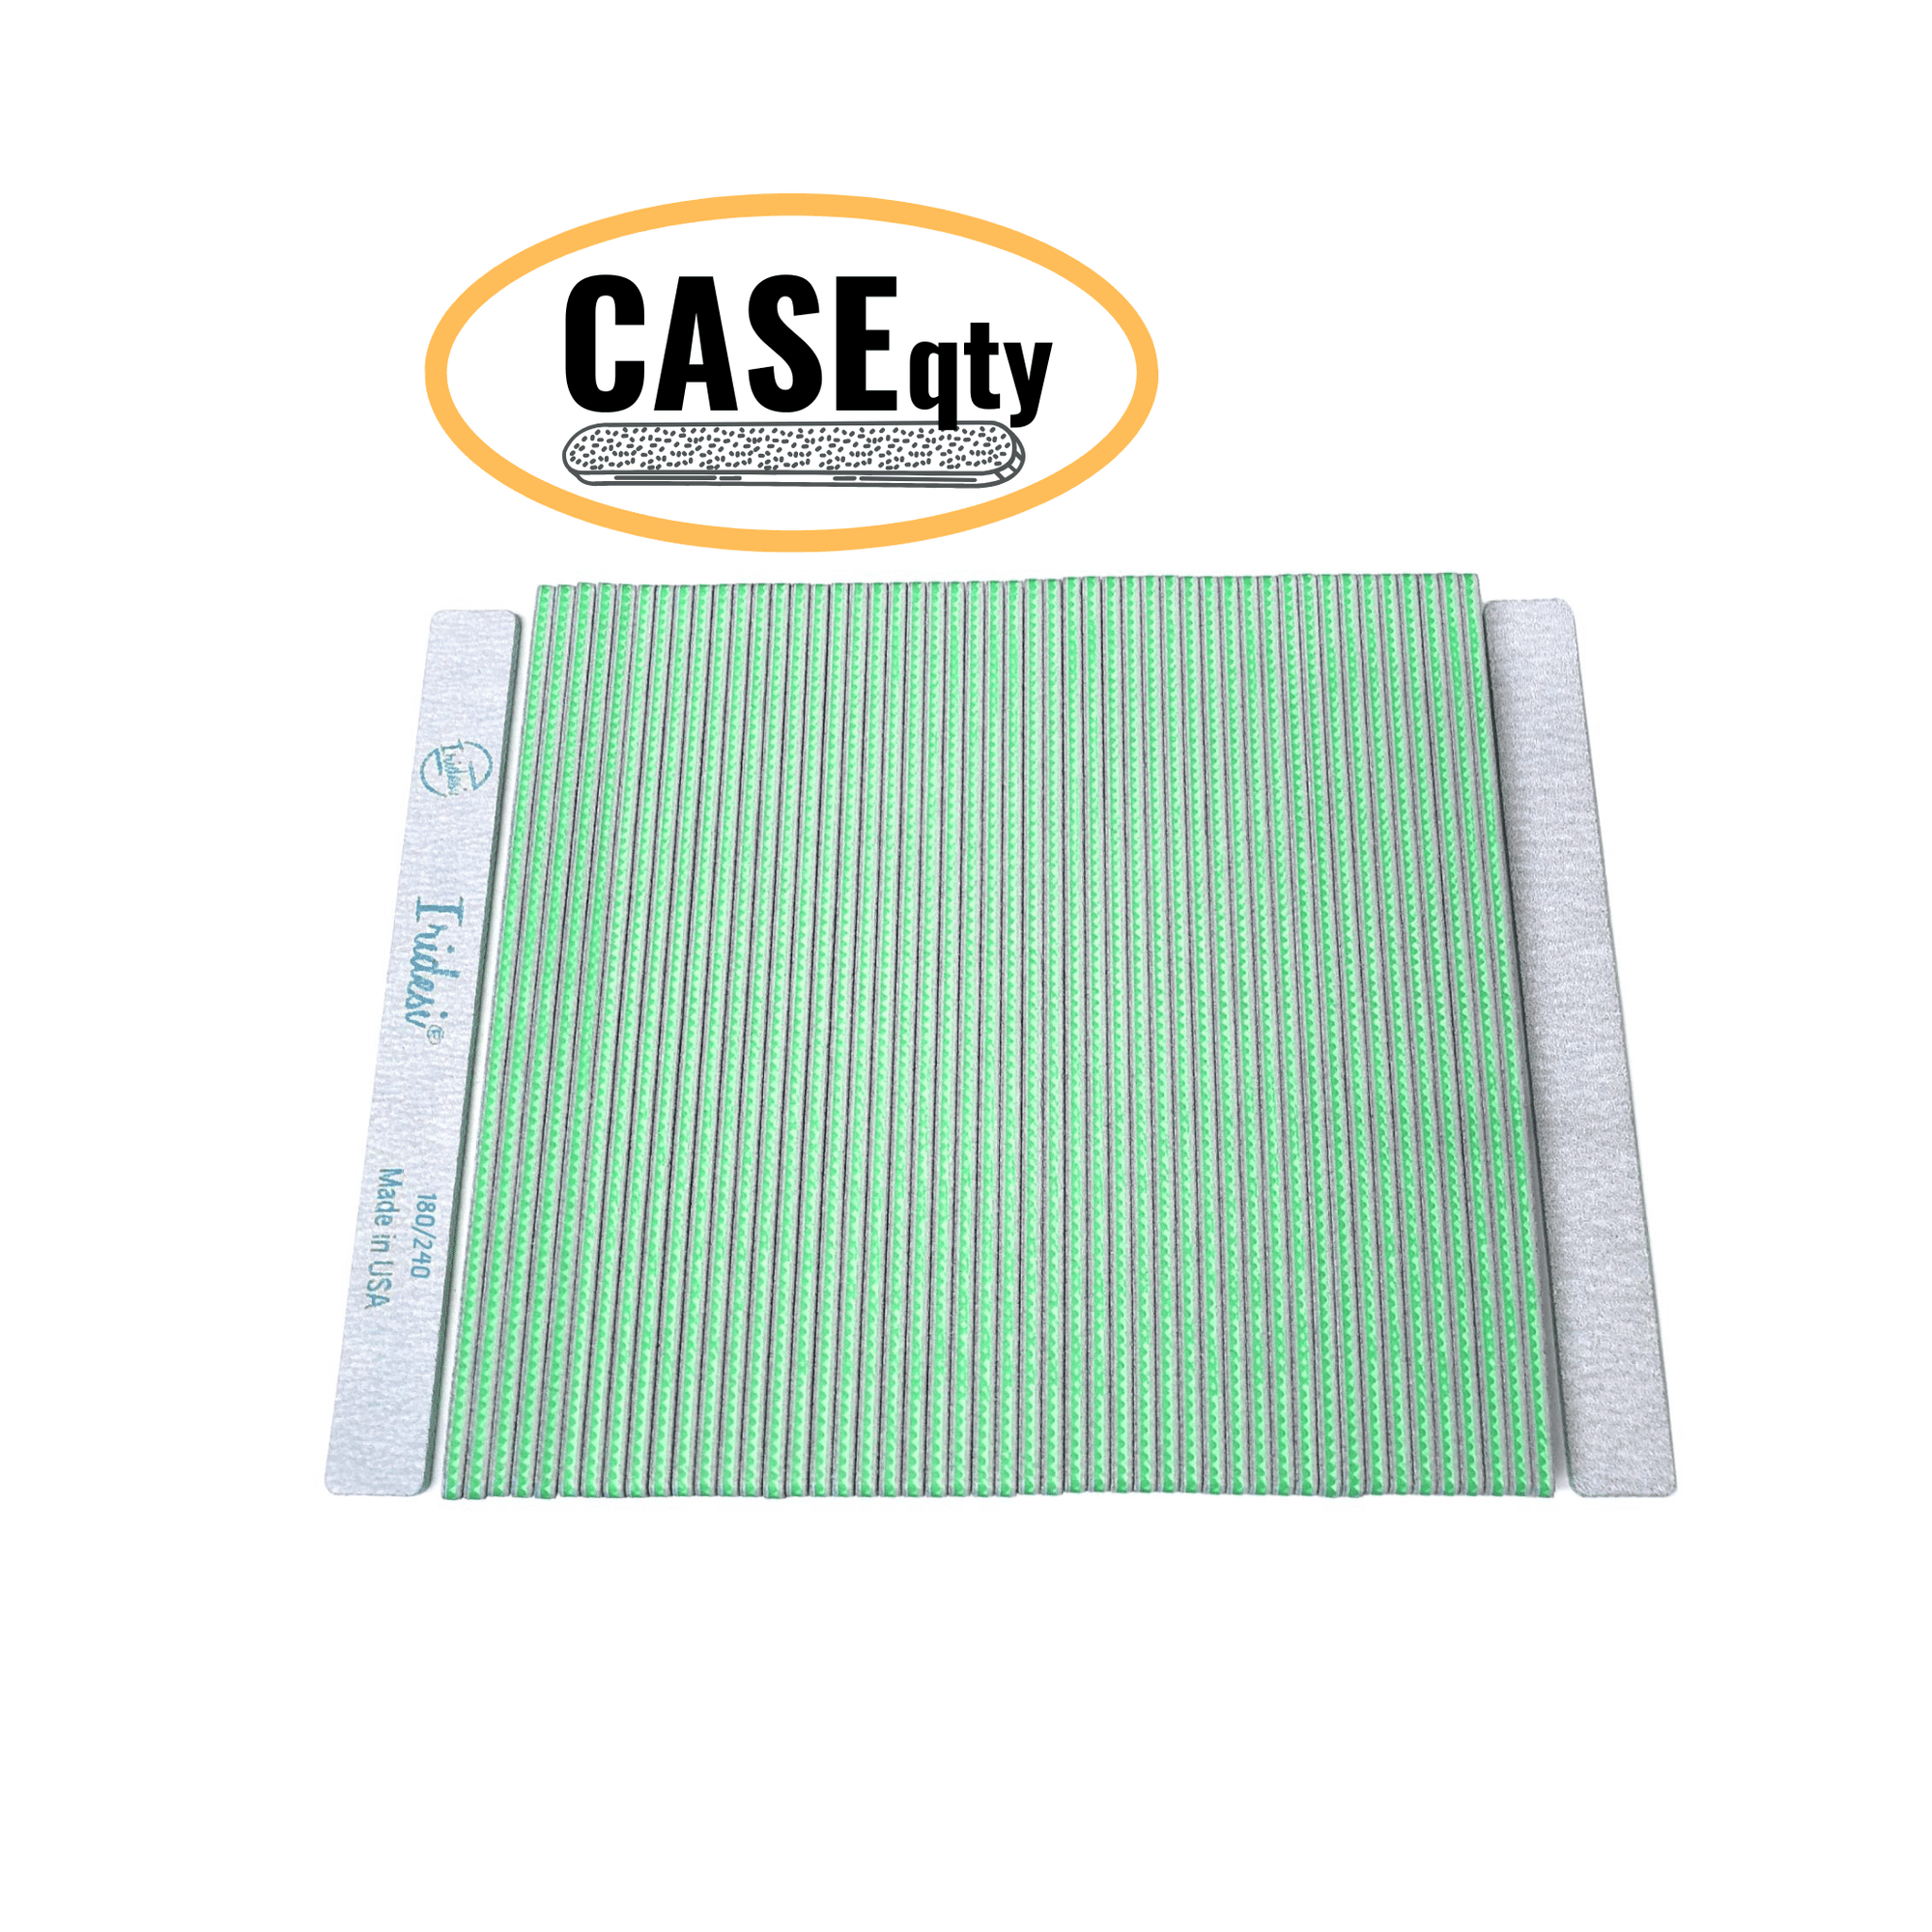 Zebra Color Coded Emery Boards, Nail Filer Serrated Edge, Square End Fingernail Files, Case of 40 Packs of 50 Pieces